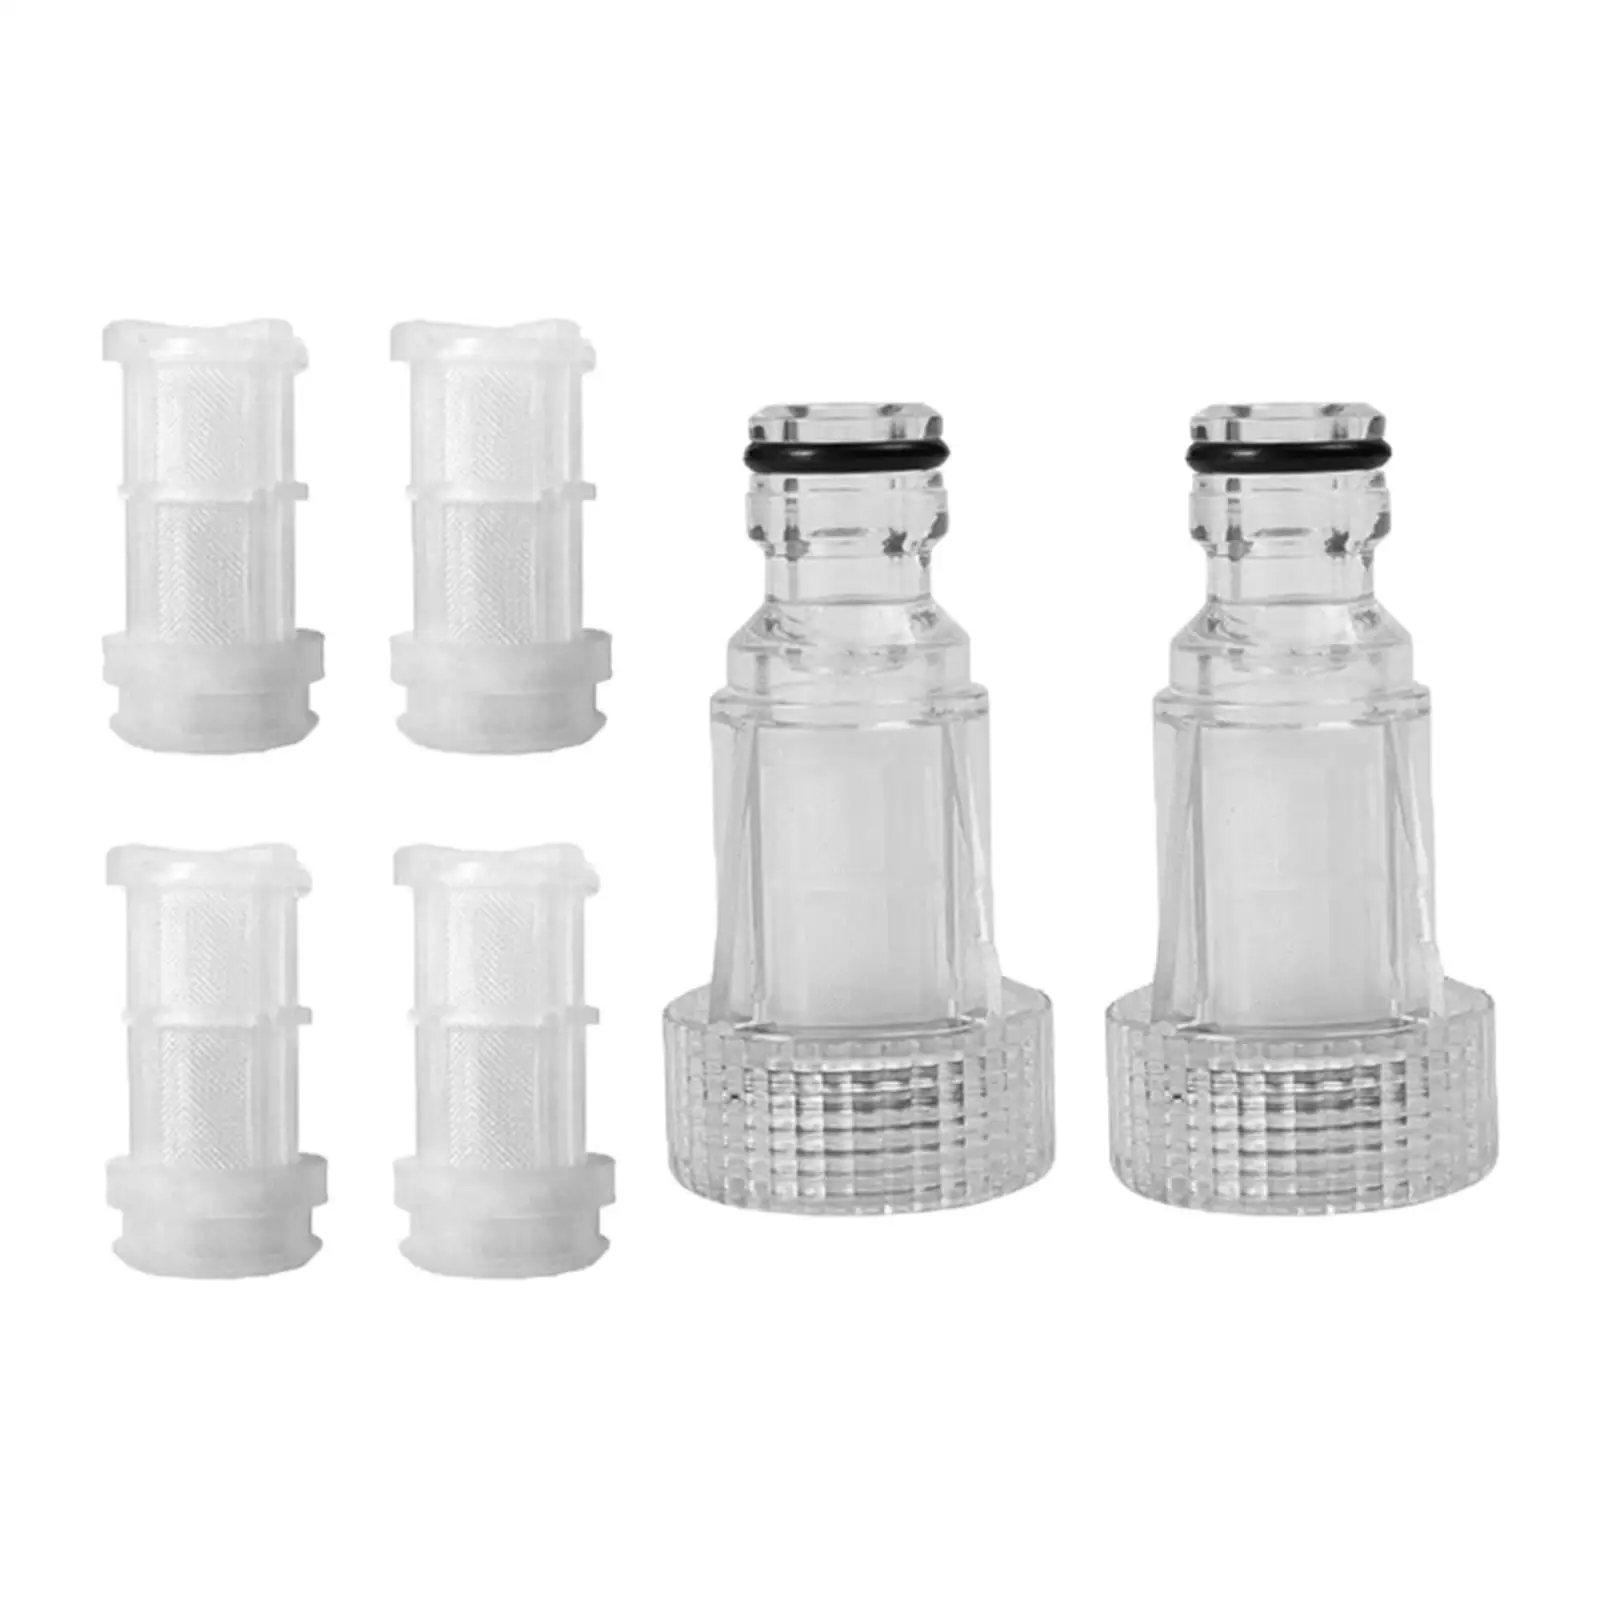 6x Water Connector Filter Hose Pipe Fitting Nozzle Pressure Washer Filters Nets for K2-K7 Series High Pressure Washers Accs